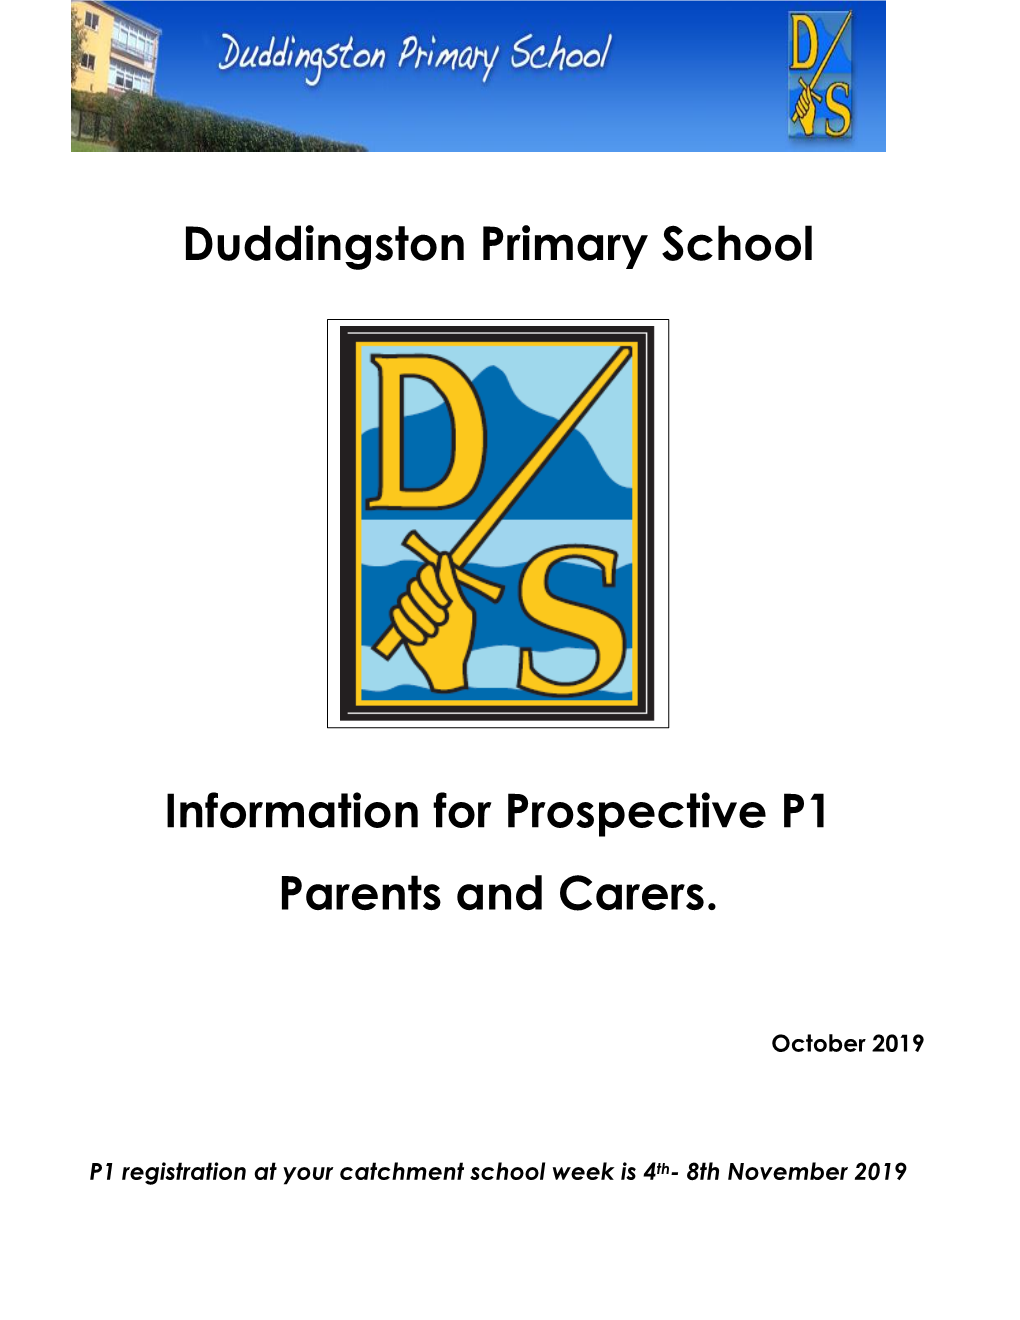 Duddingston Primary School Information for Prospective P1 Parents and Carers